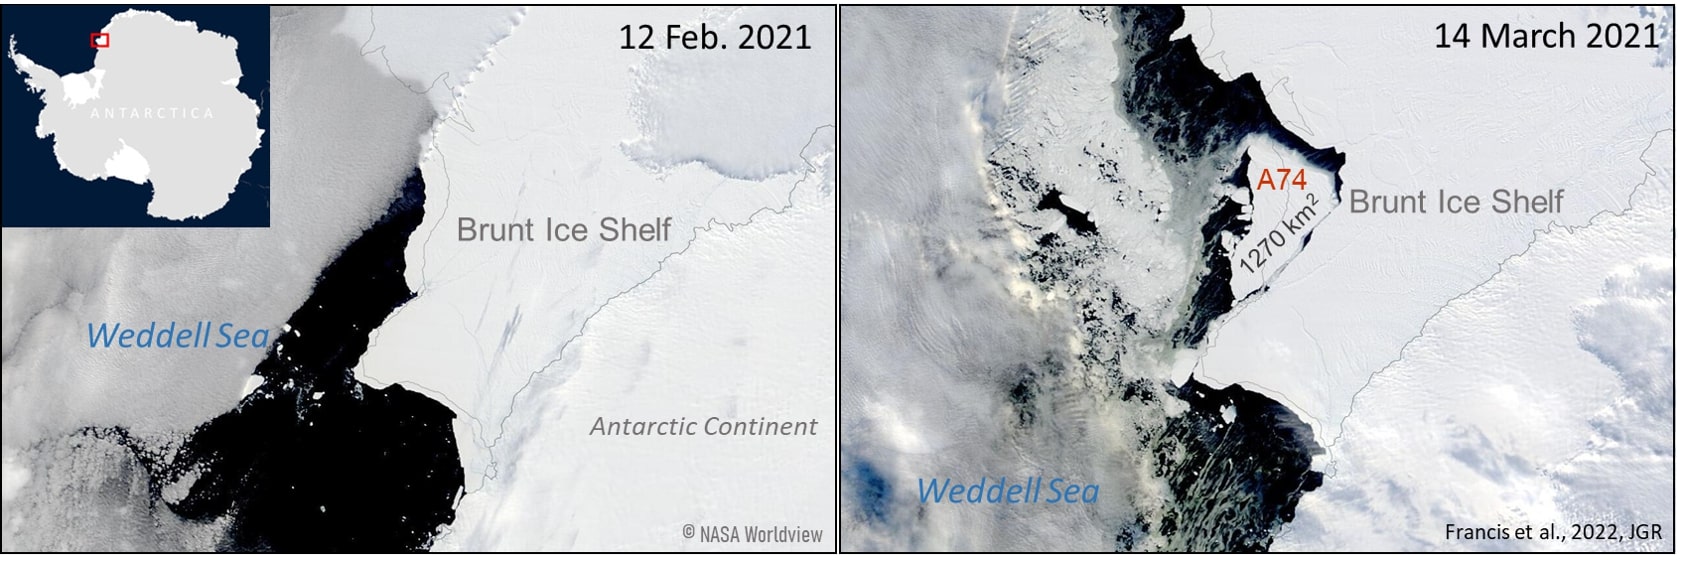 Atmospheric Triggers of the Brunt Ice Shelf Calving in February 2021